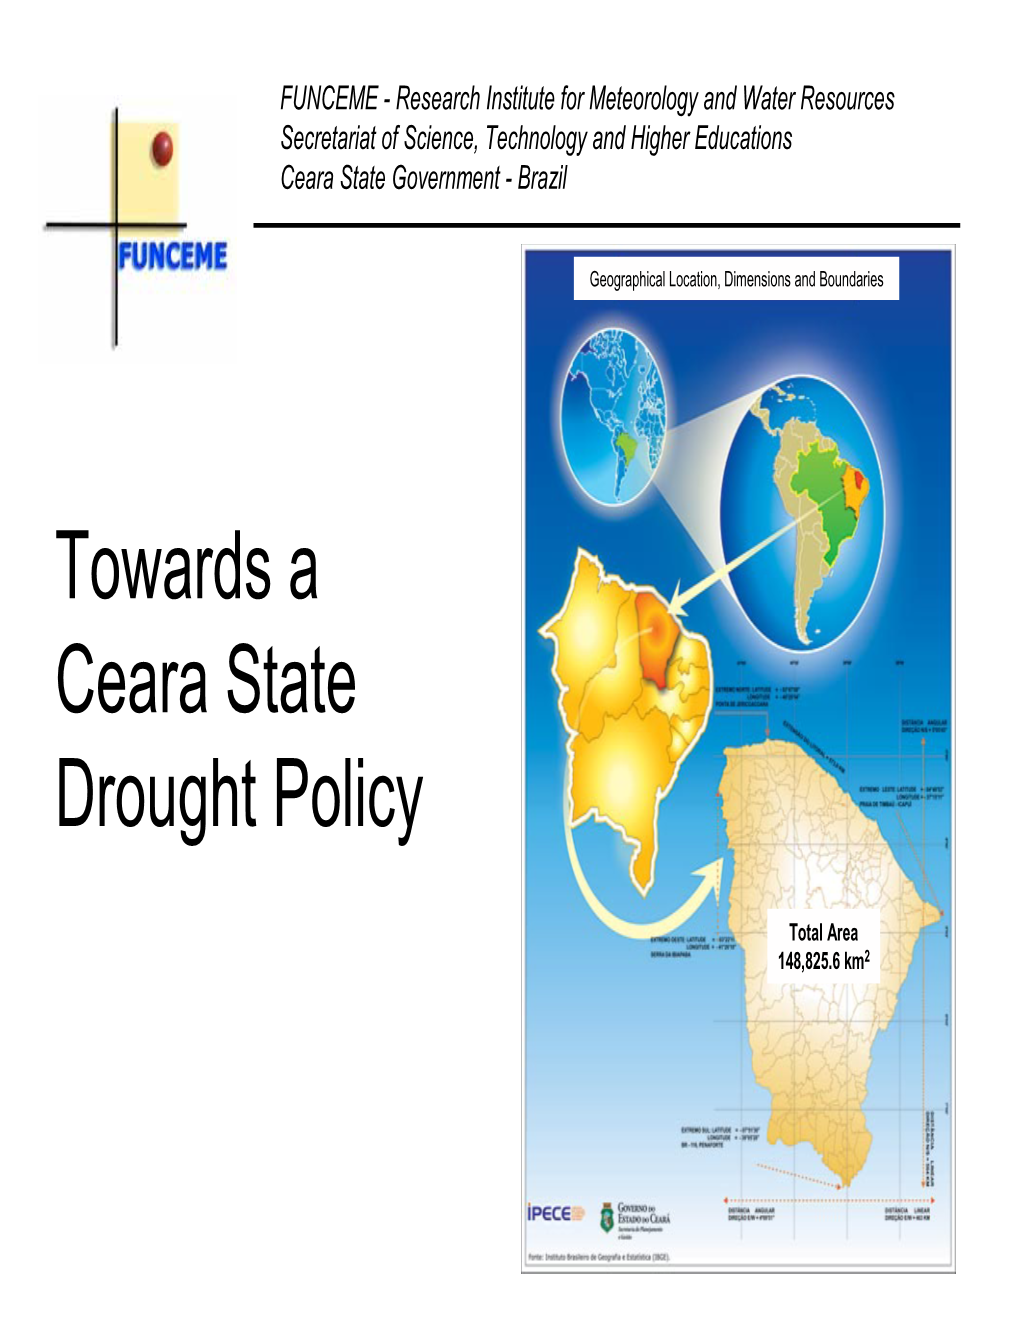 Towards a Ceara State Drought Policy